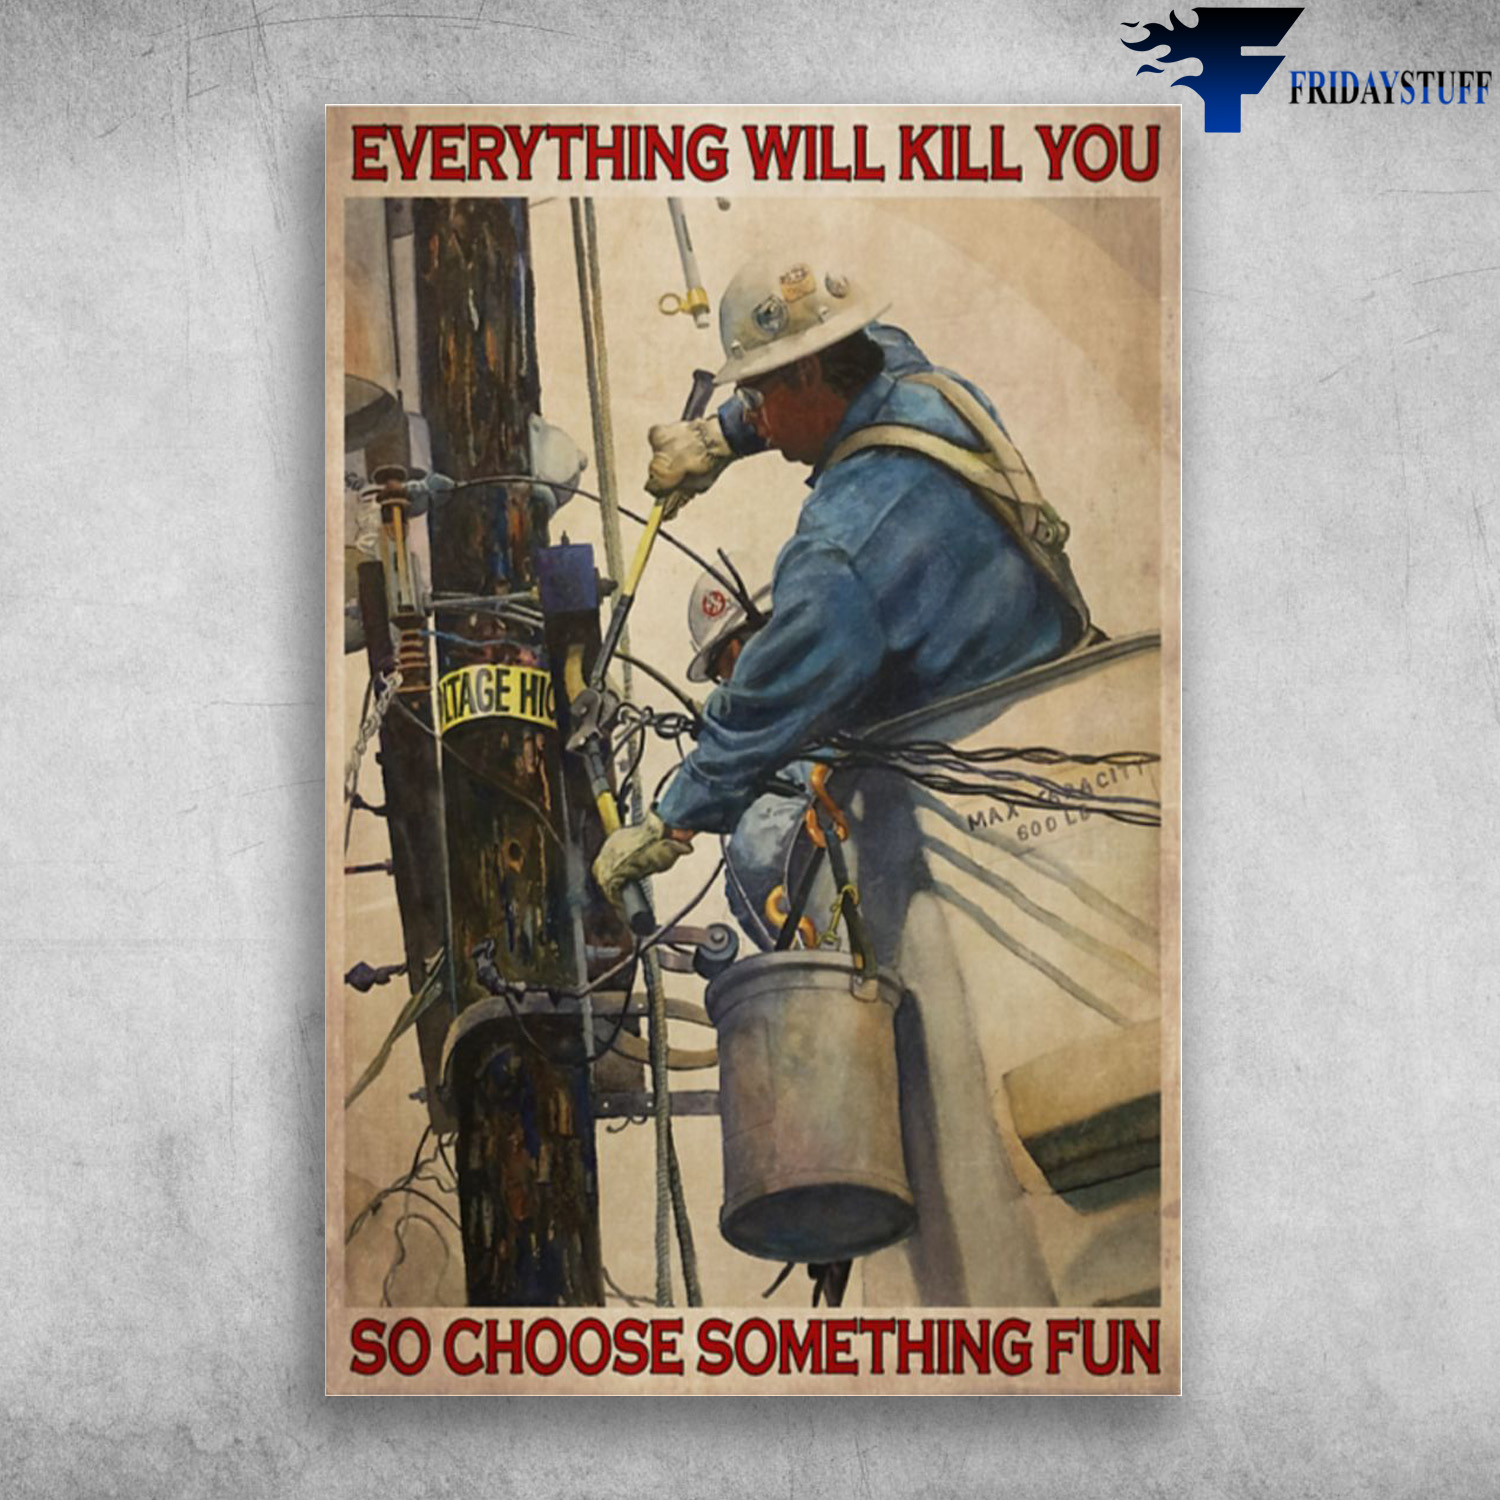 Line Man On Work - Everything Will Kill You, So Choose Something Fun